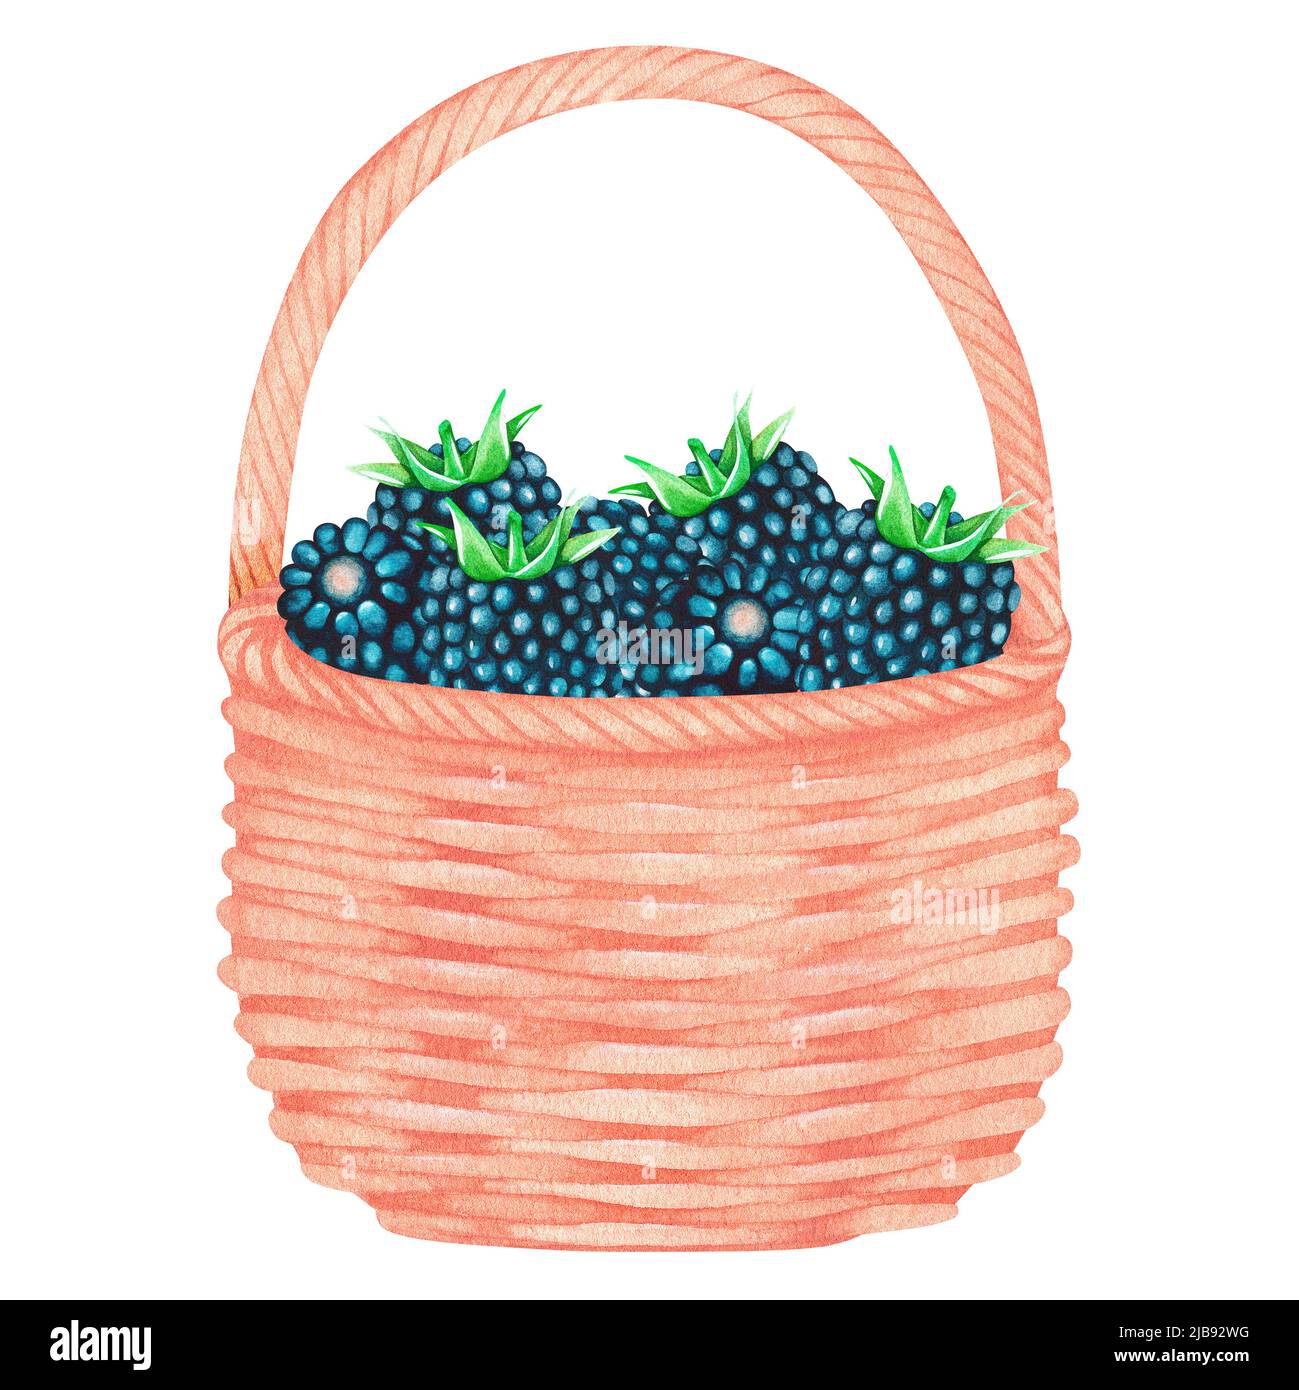 Blackberries in the basket. Watercolor illustration. Isolated on a white background. For your design. Suitable for cookbooks, recipes, aprons, kitchen Stock Photo